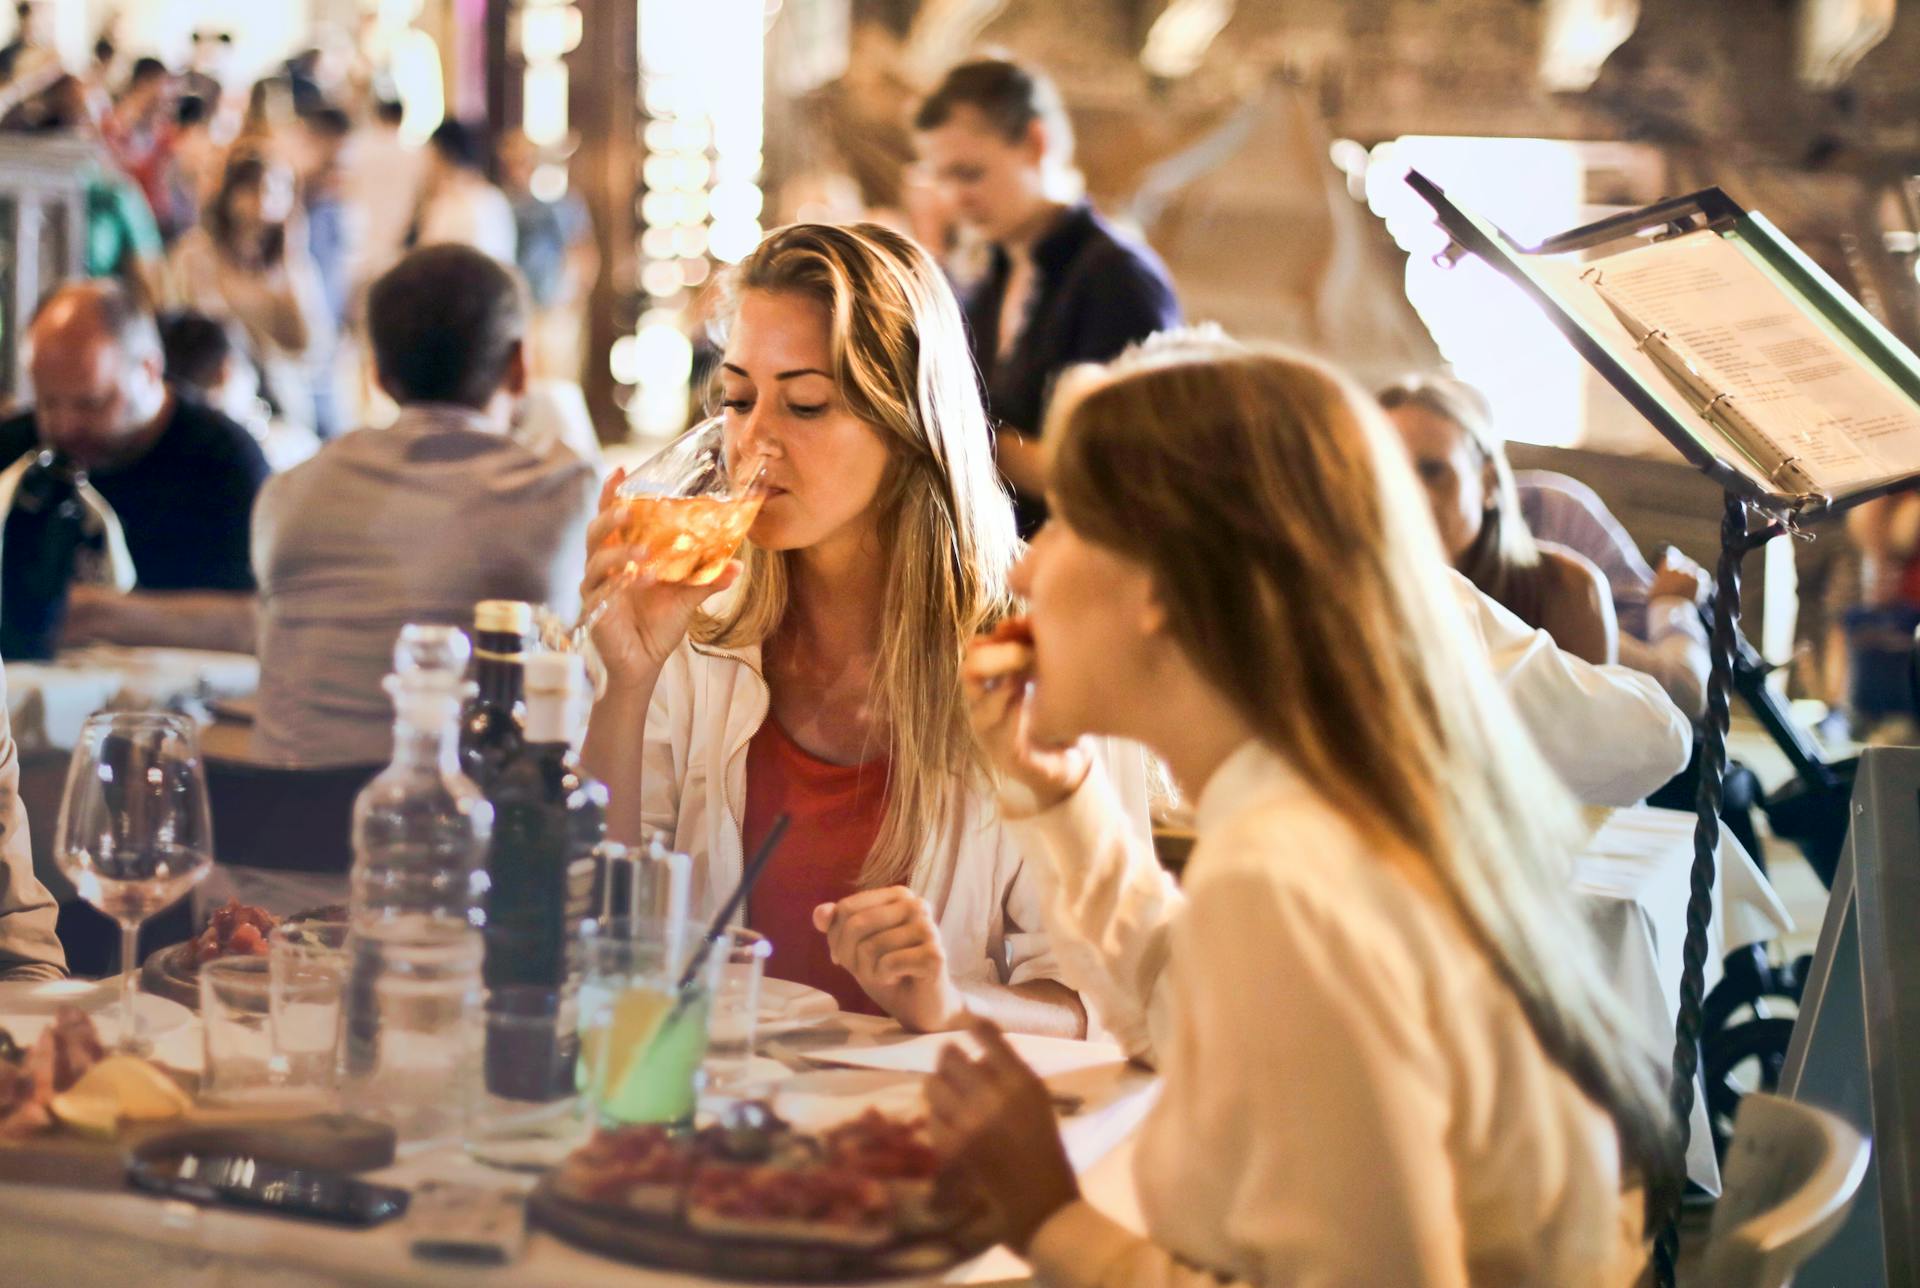 Two women having lunch outdoors | Source: Pexels